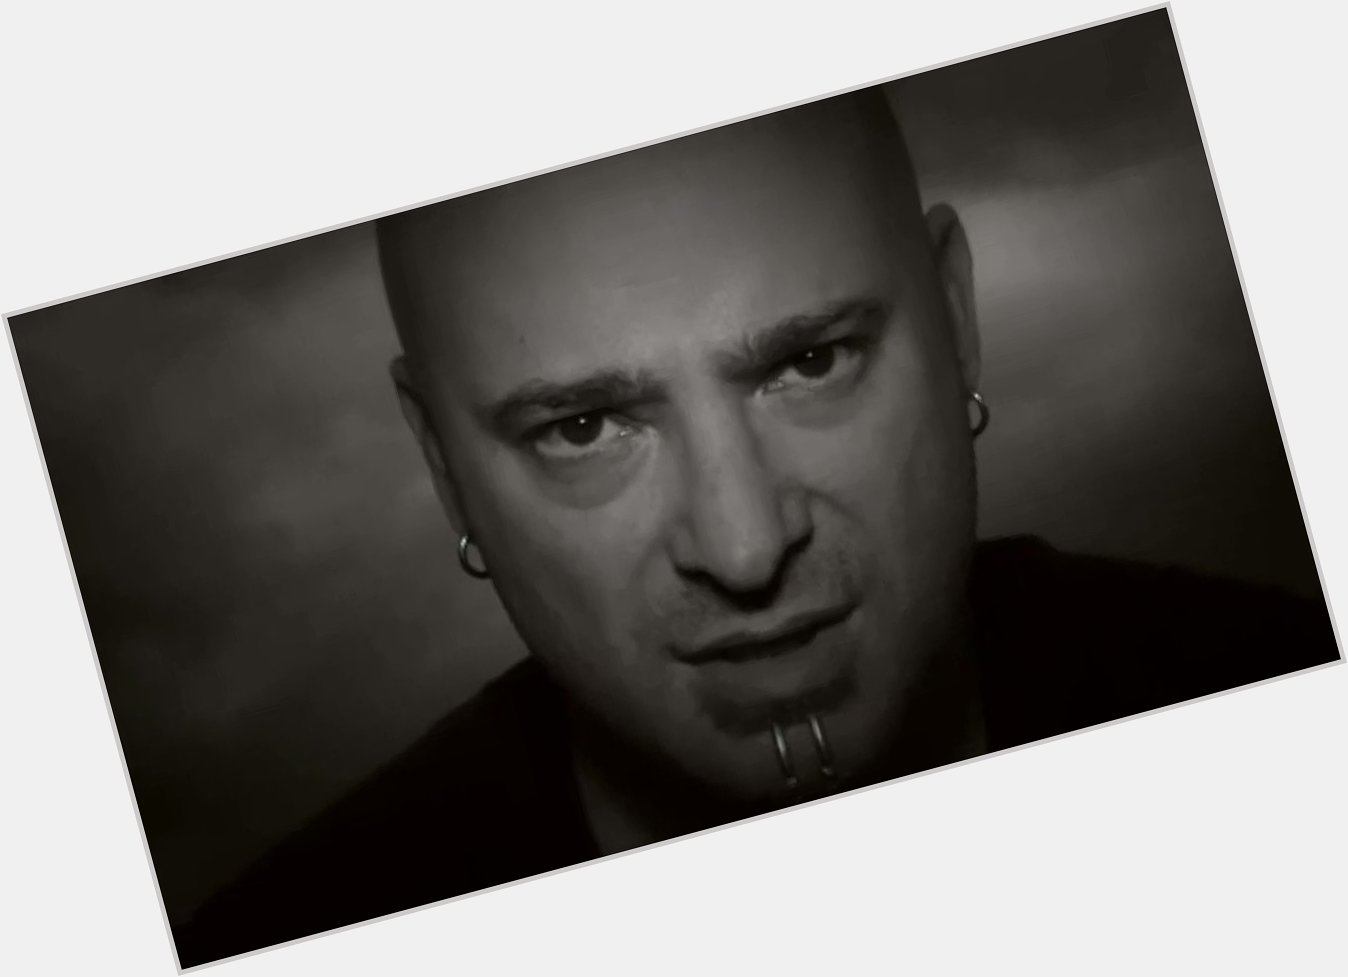 Wishing a very Happy Birthday to our very own, David Draiman!! 